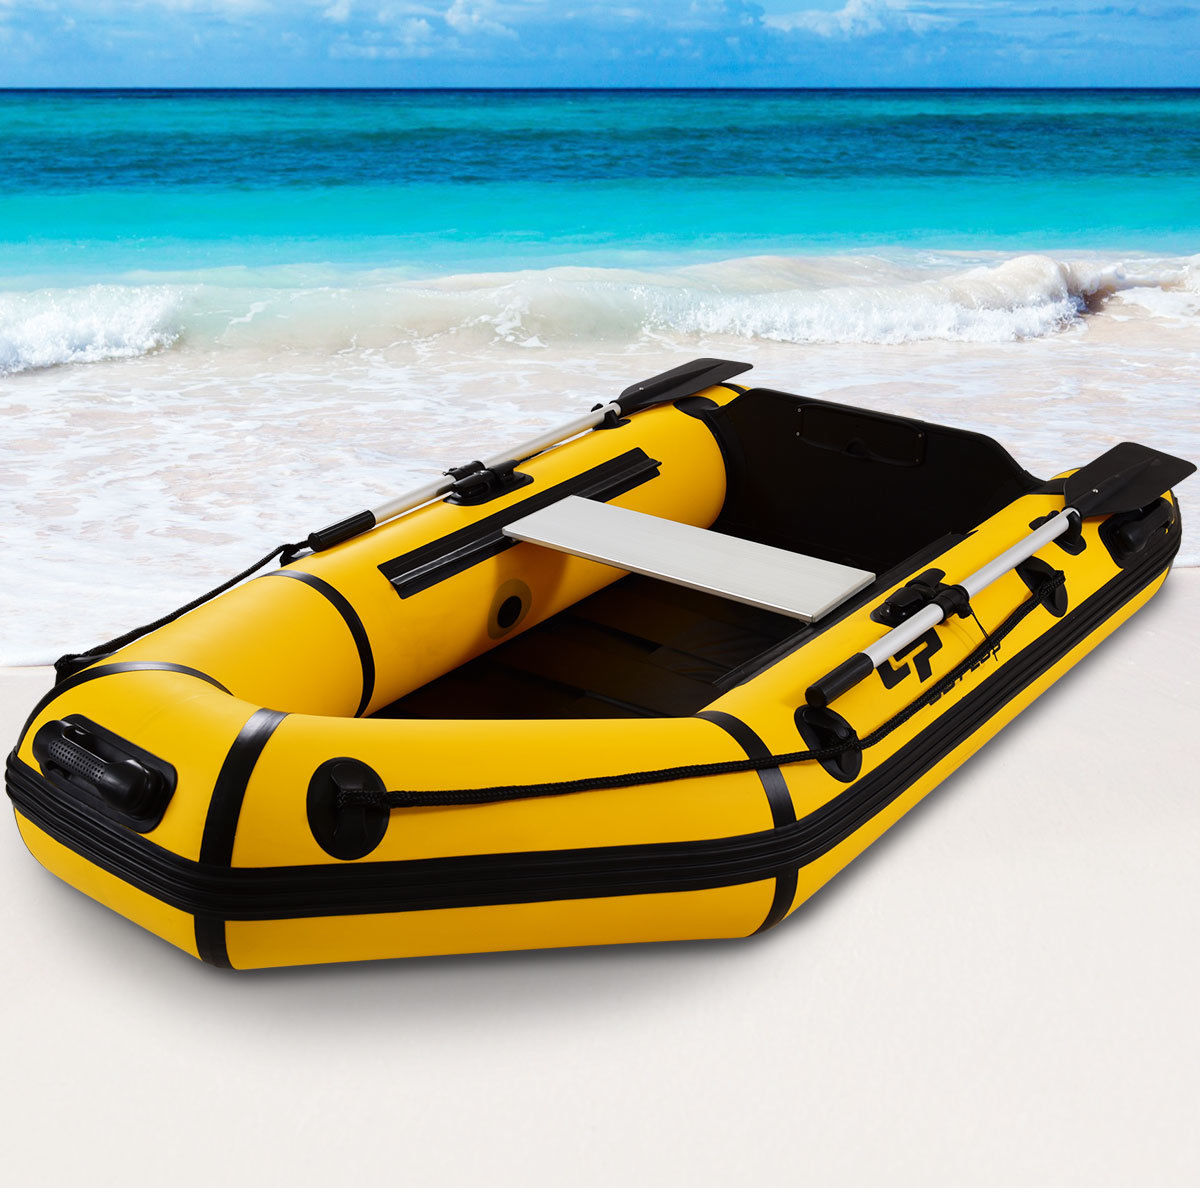 Goplus 2 Person 7.5FT Inflatable Dinghy Boat Fishing Tender Rafting Water (Best Dinghy For Cruising)